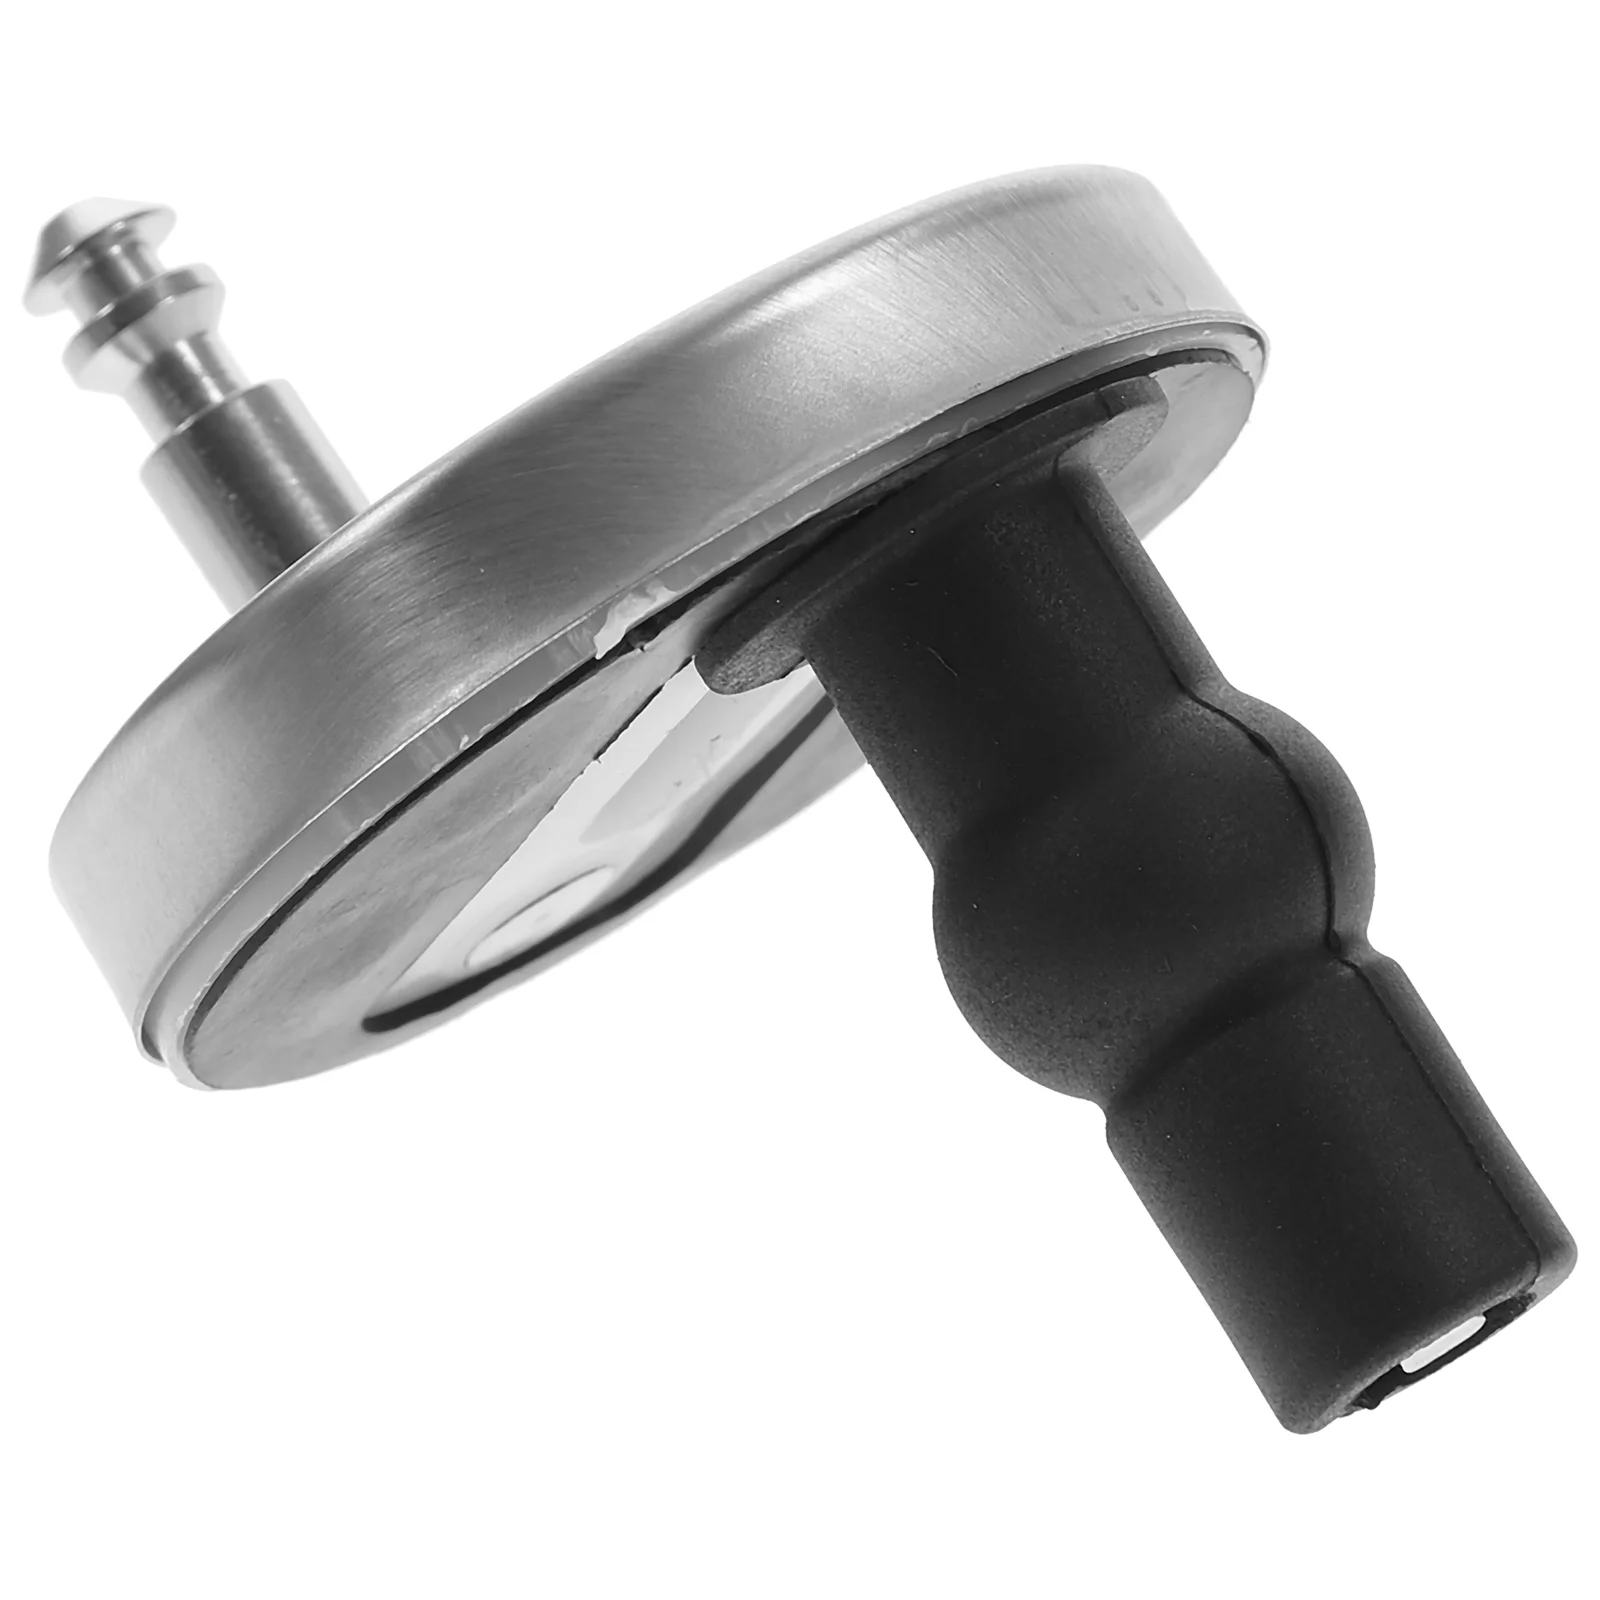 

Toilet Seat Screw Replacement Screws Lids Bolt Hinge Cover Replacing Bolts Fastener Fixed Stainless Steel Hinges